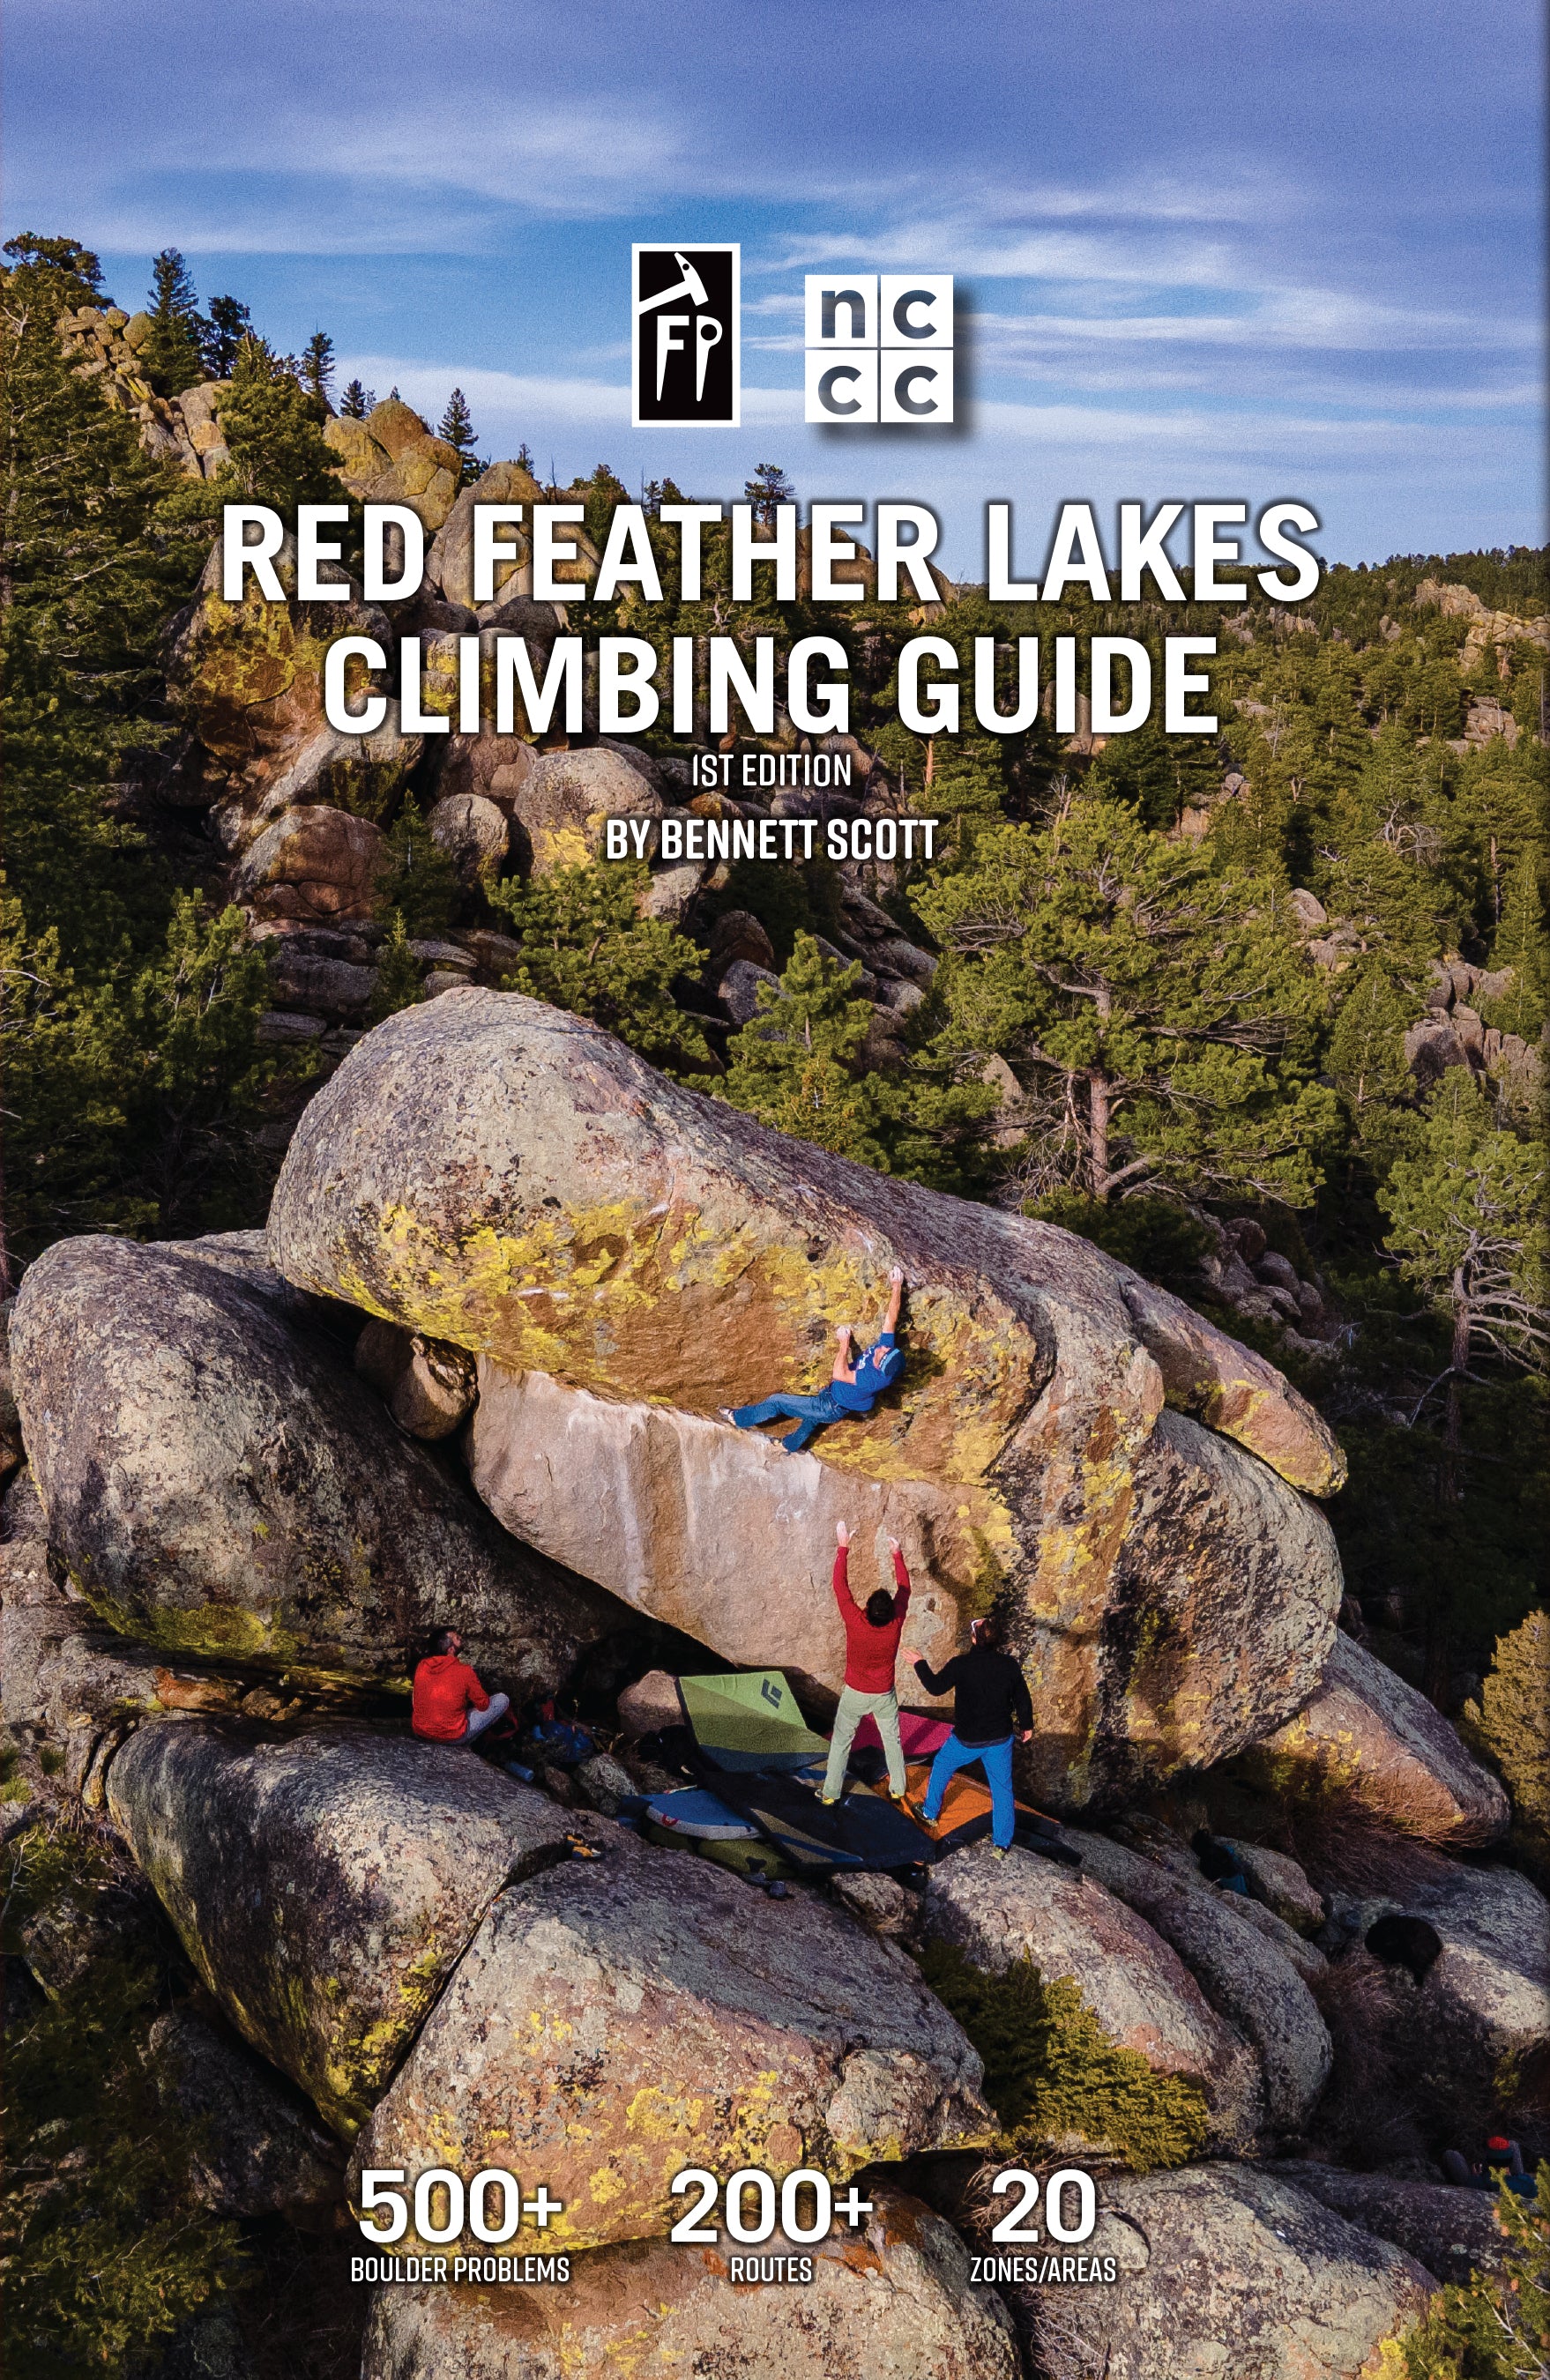 Red Feather Lakes Climbing Guide